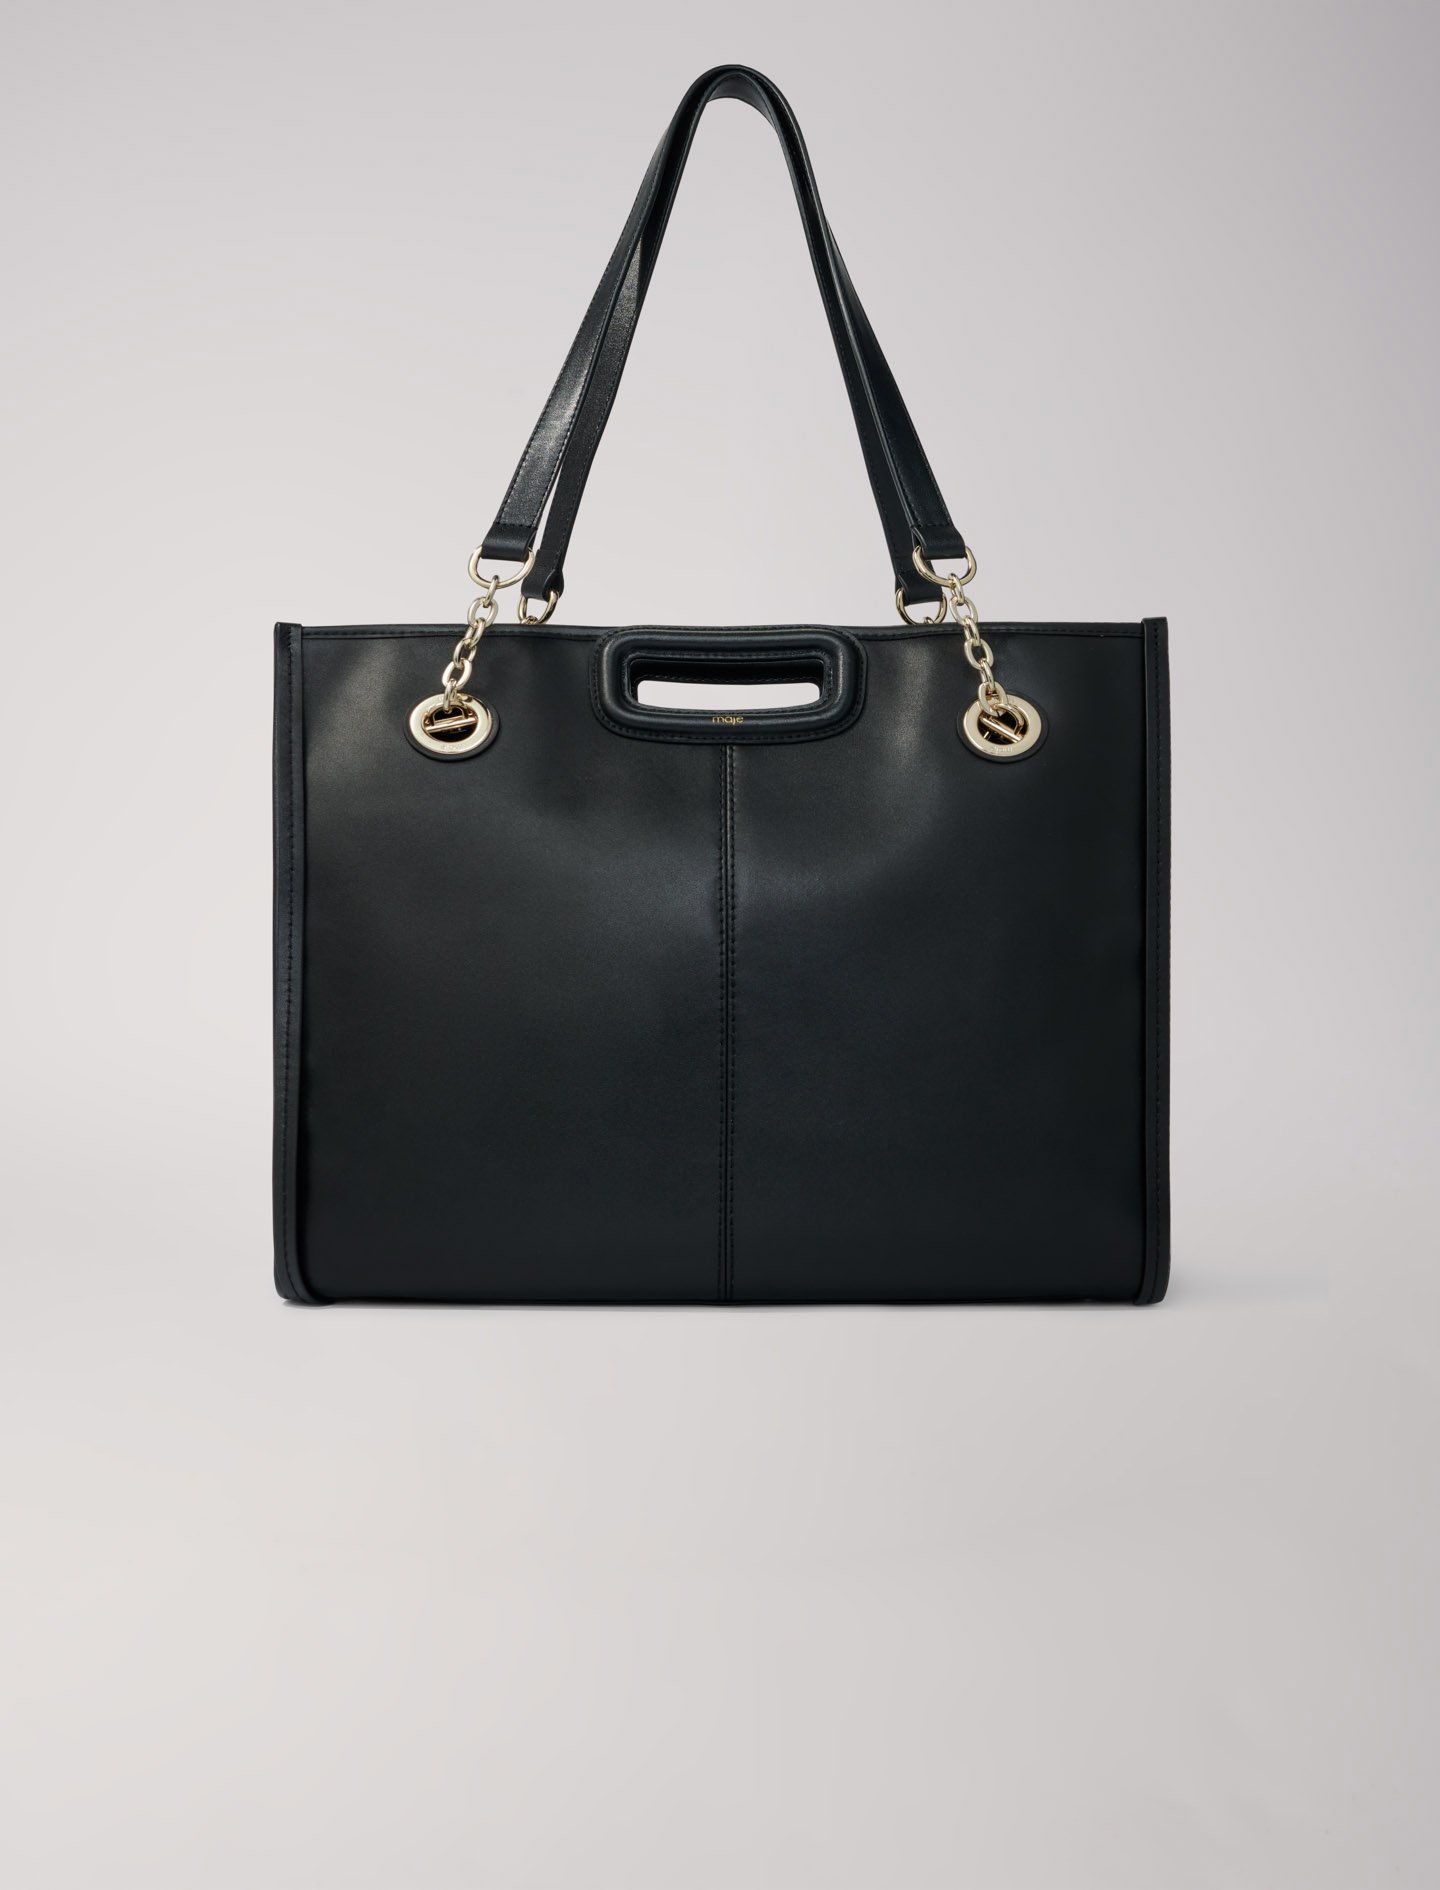 Mixte's polyester Eyelet: Leather tote bag for Spring/Summer, size Mixte-All Bags-OS (ONE SIZE), in color Black / Black